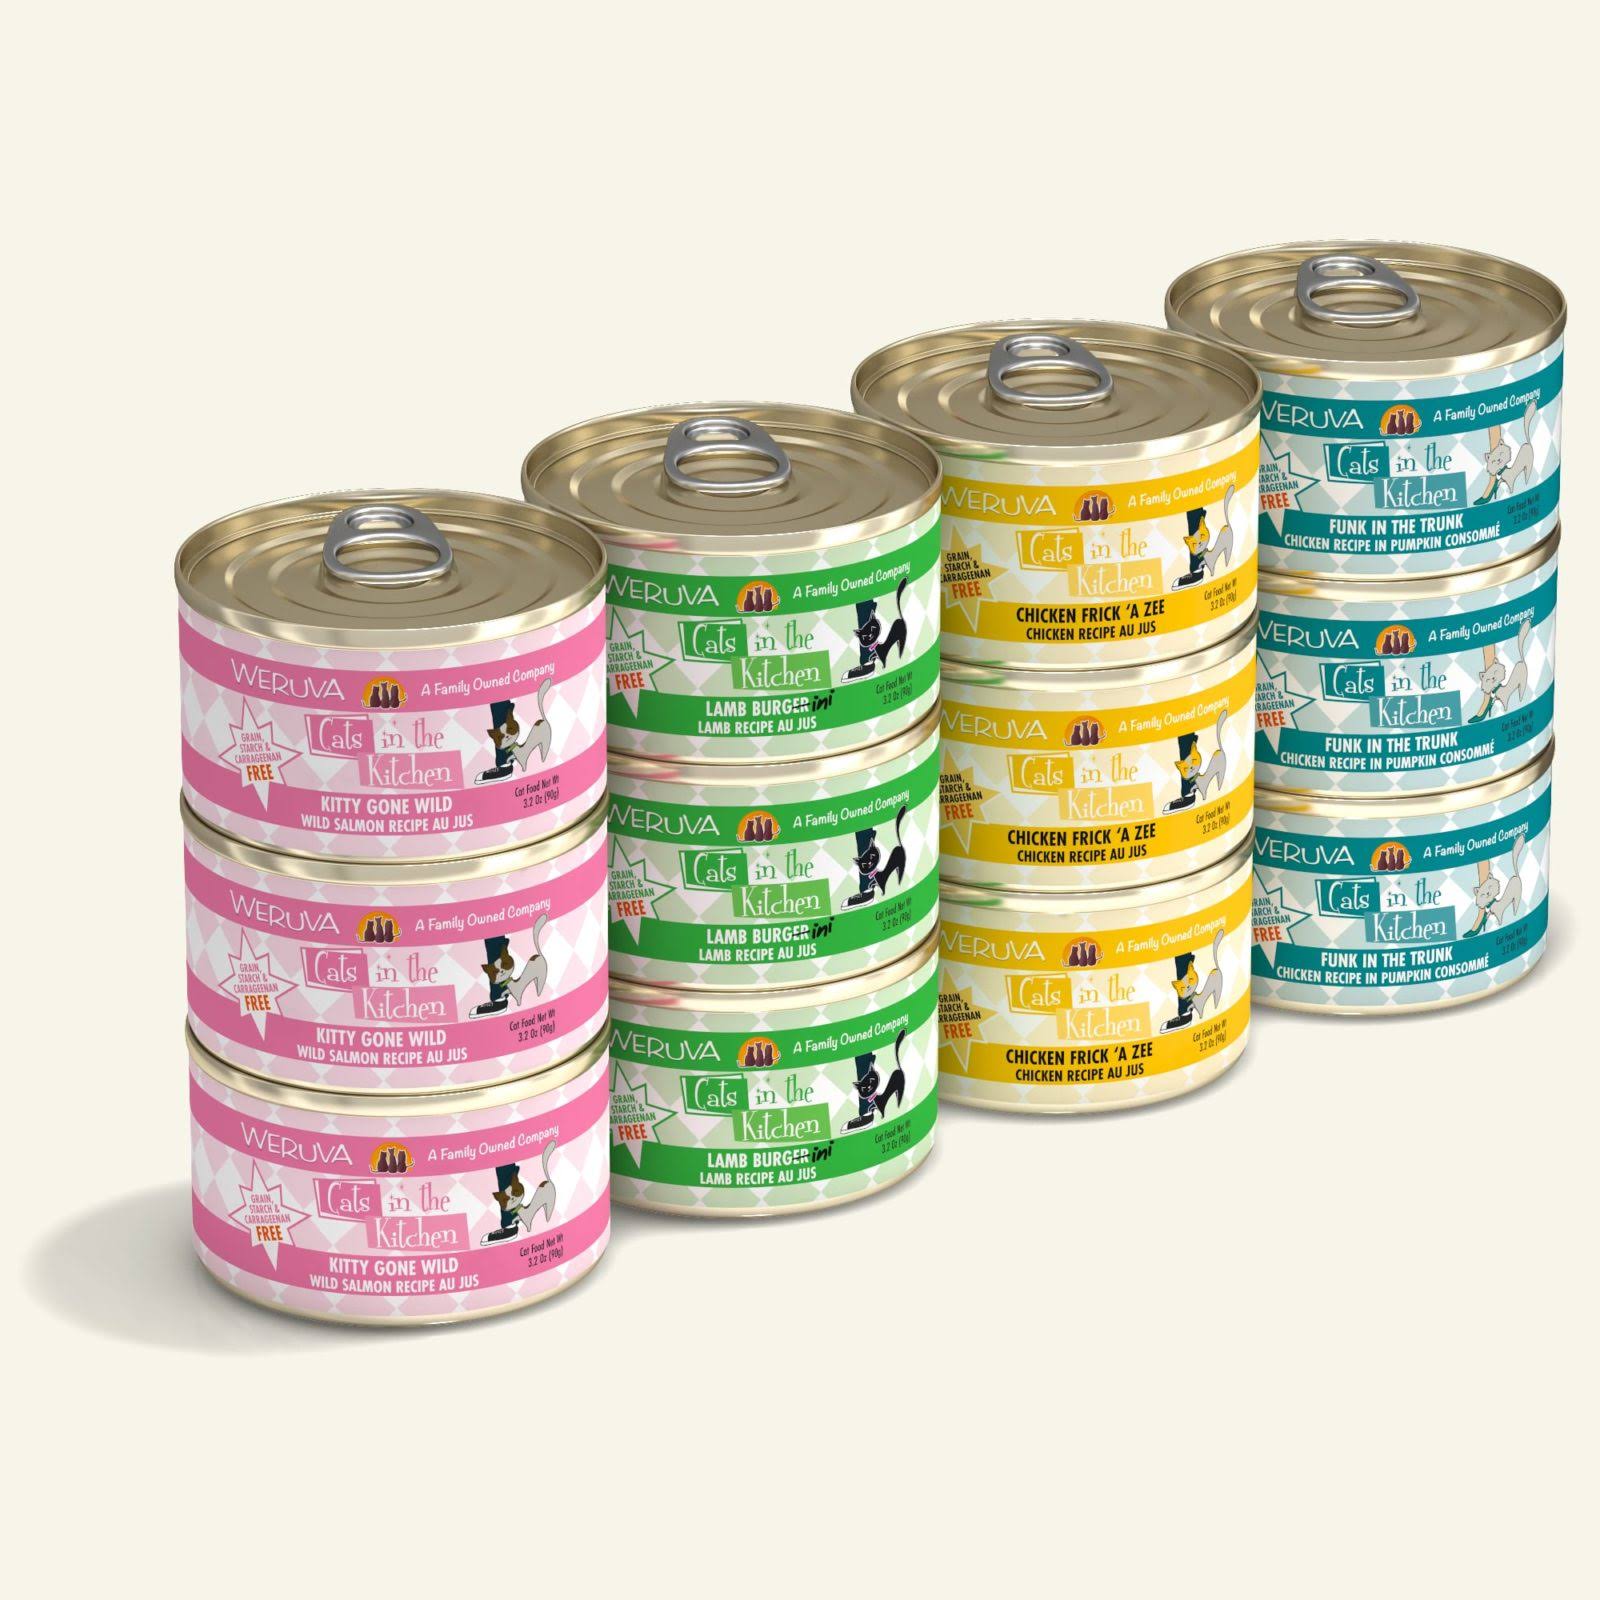 Weruva Cats in the Kitchen Variety Pack 12 x 3.2 oz. cans